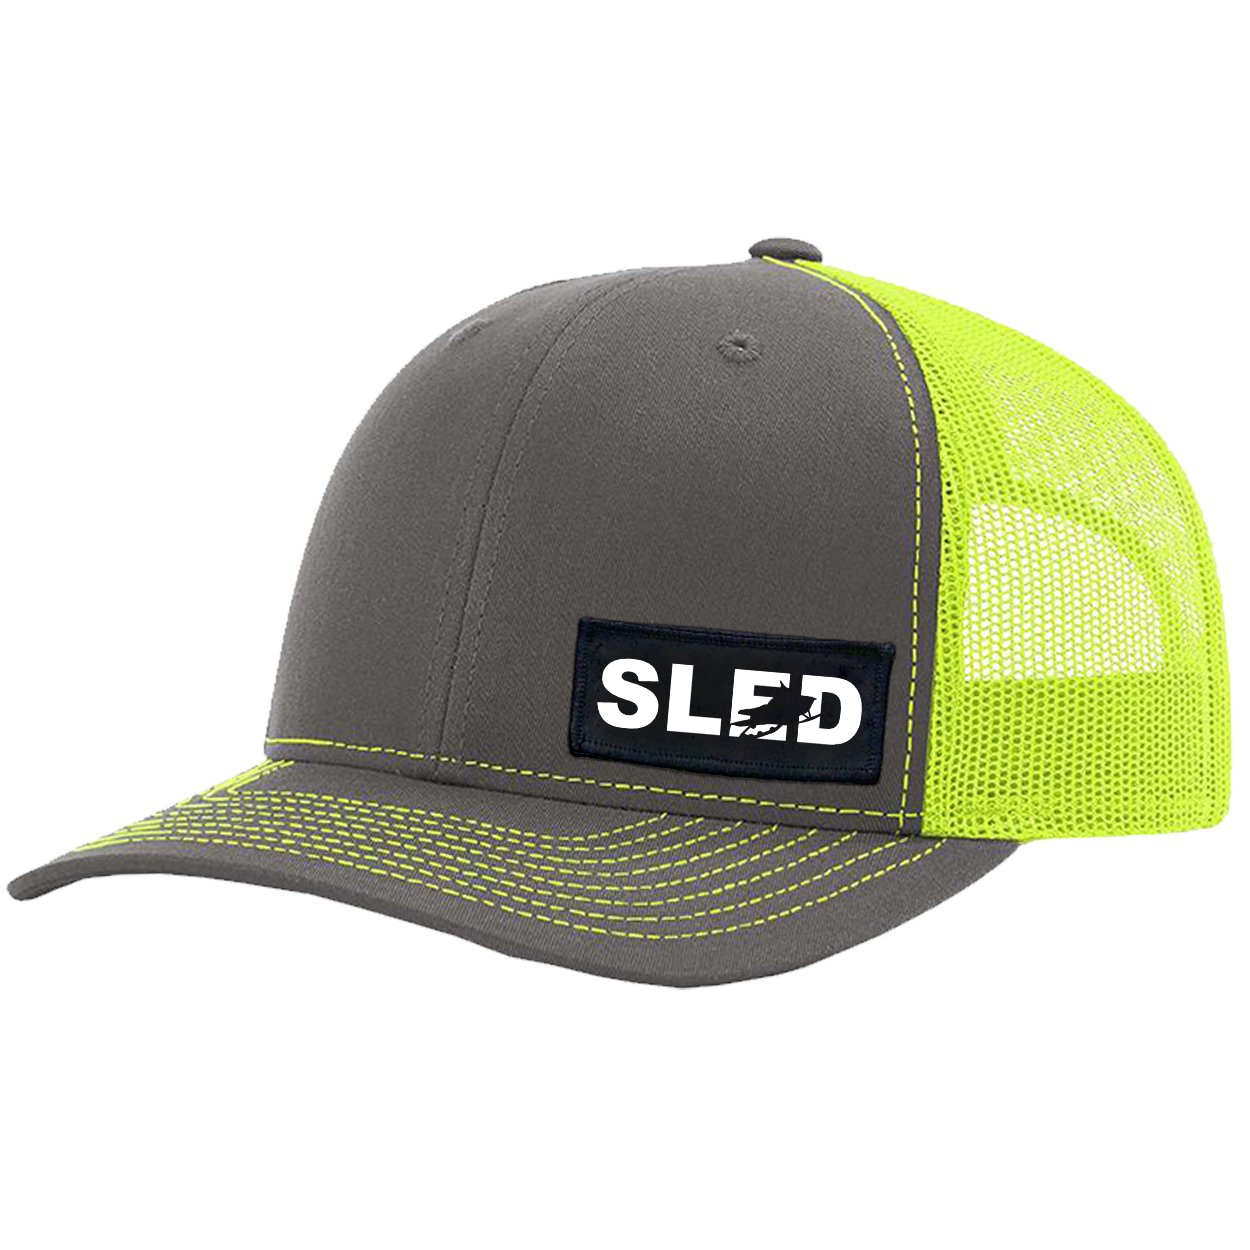 Sled Snowmobile Logo Night Out Woven Patch Snapback Trucker Hat Charcoal/Neon Yellow (White Logo)